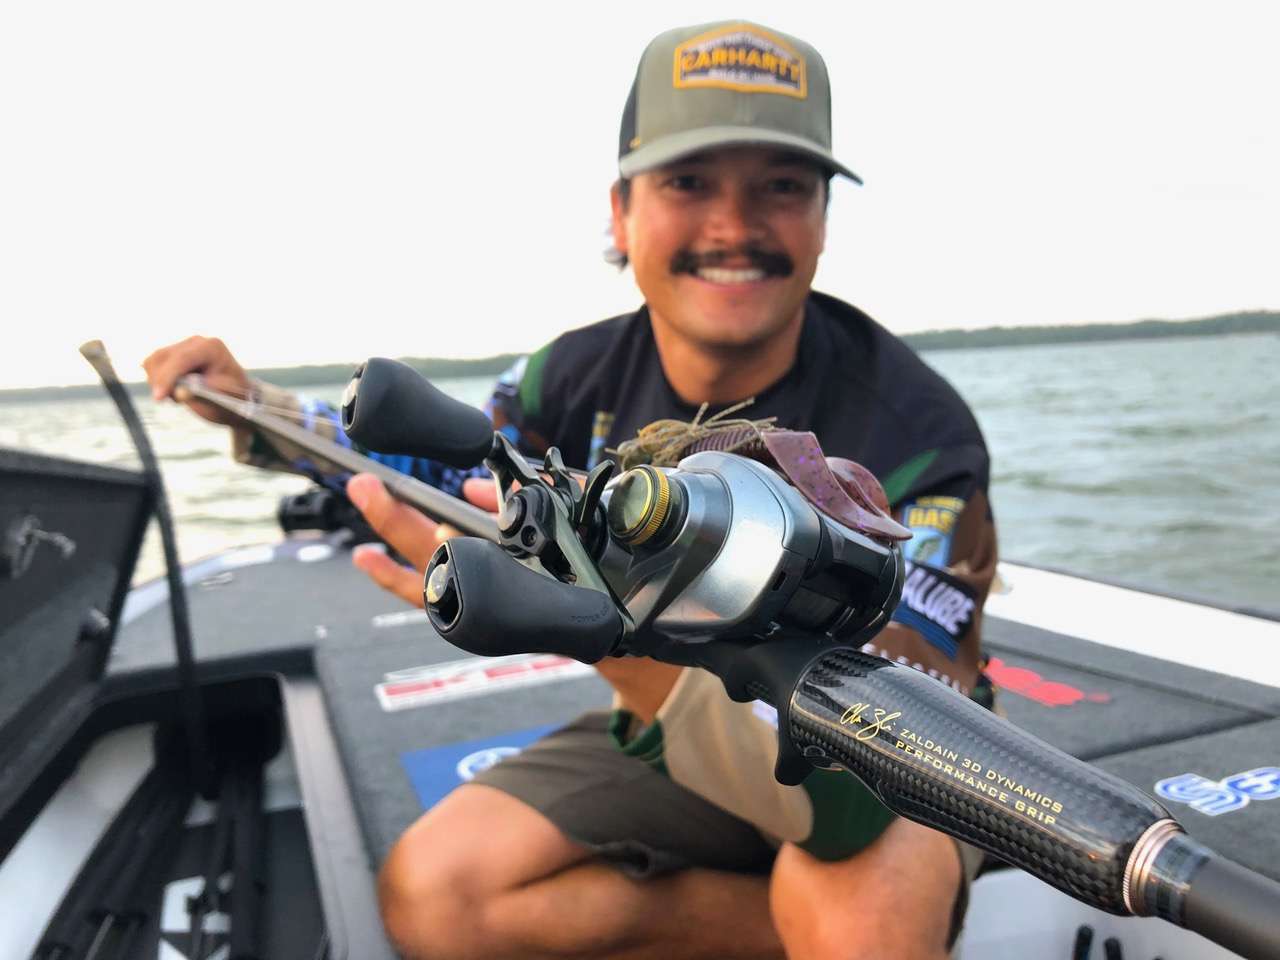 The first lure out of the rod box is a 3/4-ounce football jig tied to his brand spanking new signature series of rods from MegaBass.